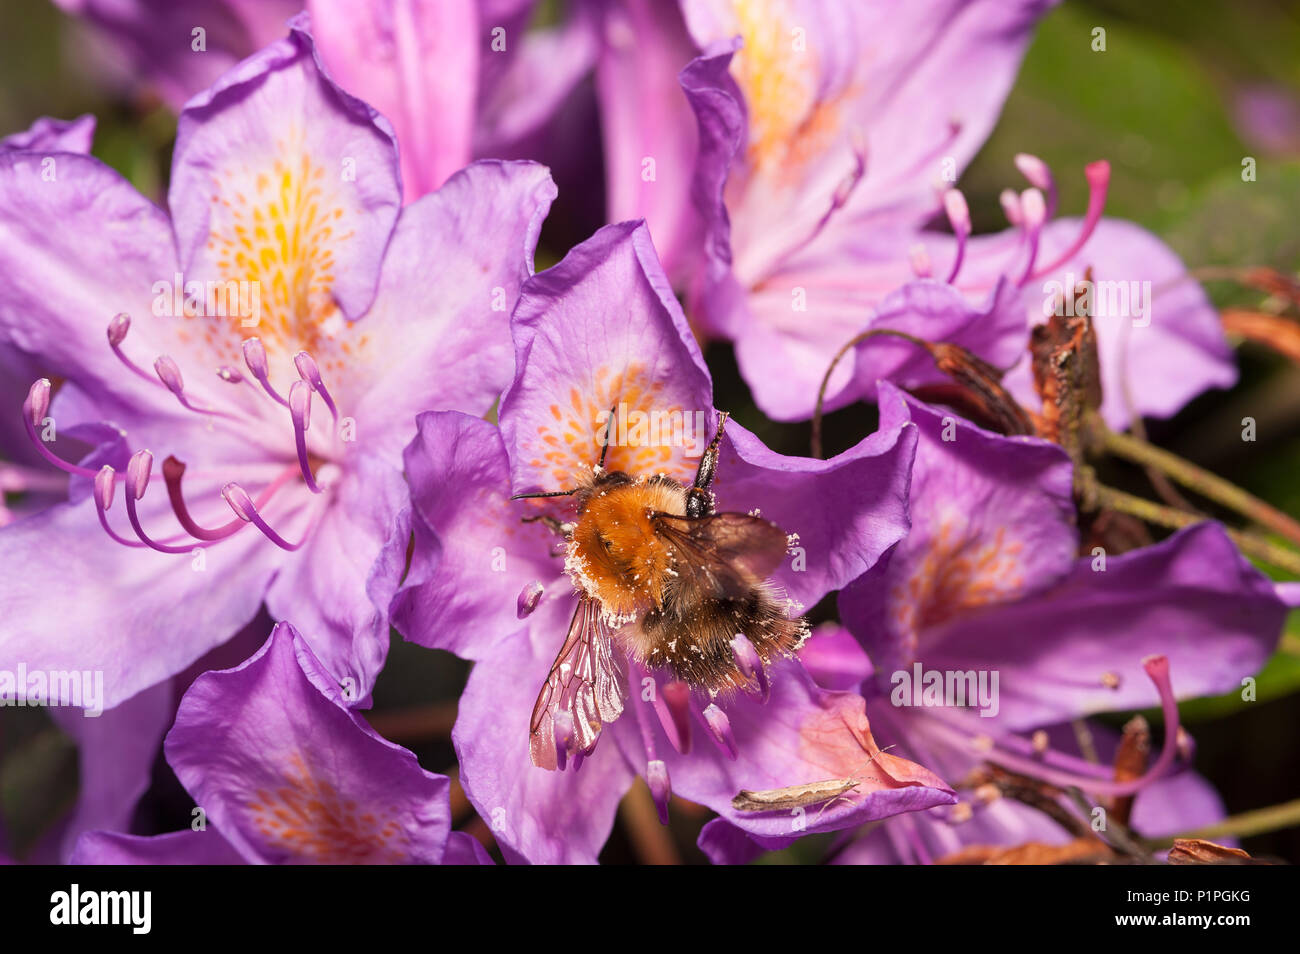 A feeding frenzy feeding on wild Rhododendron flowers has left bumblebees coated in pollen all over adhering to fine hairs on body Bombus pascuorum Stock Photo